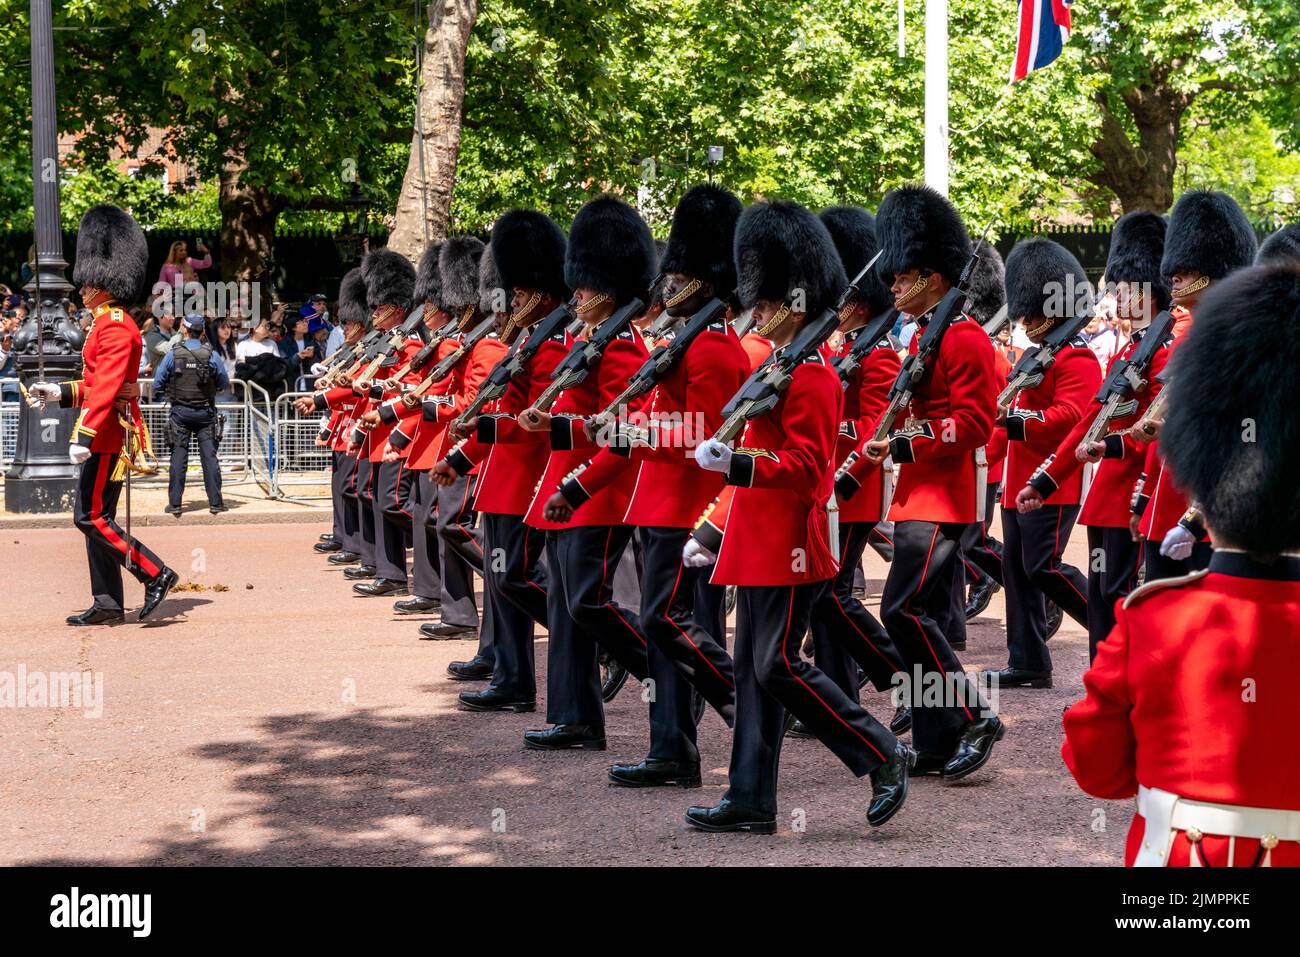 British Army Soldiers March Along The Mall After Taking Part In The Trooping The Colour Ceremony, The Queen's Birthday Parade, London, UK. Stock Photo